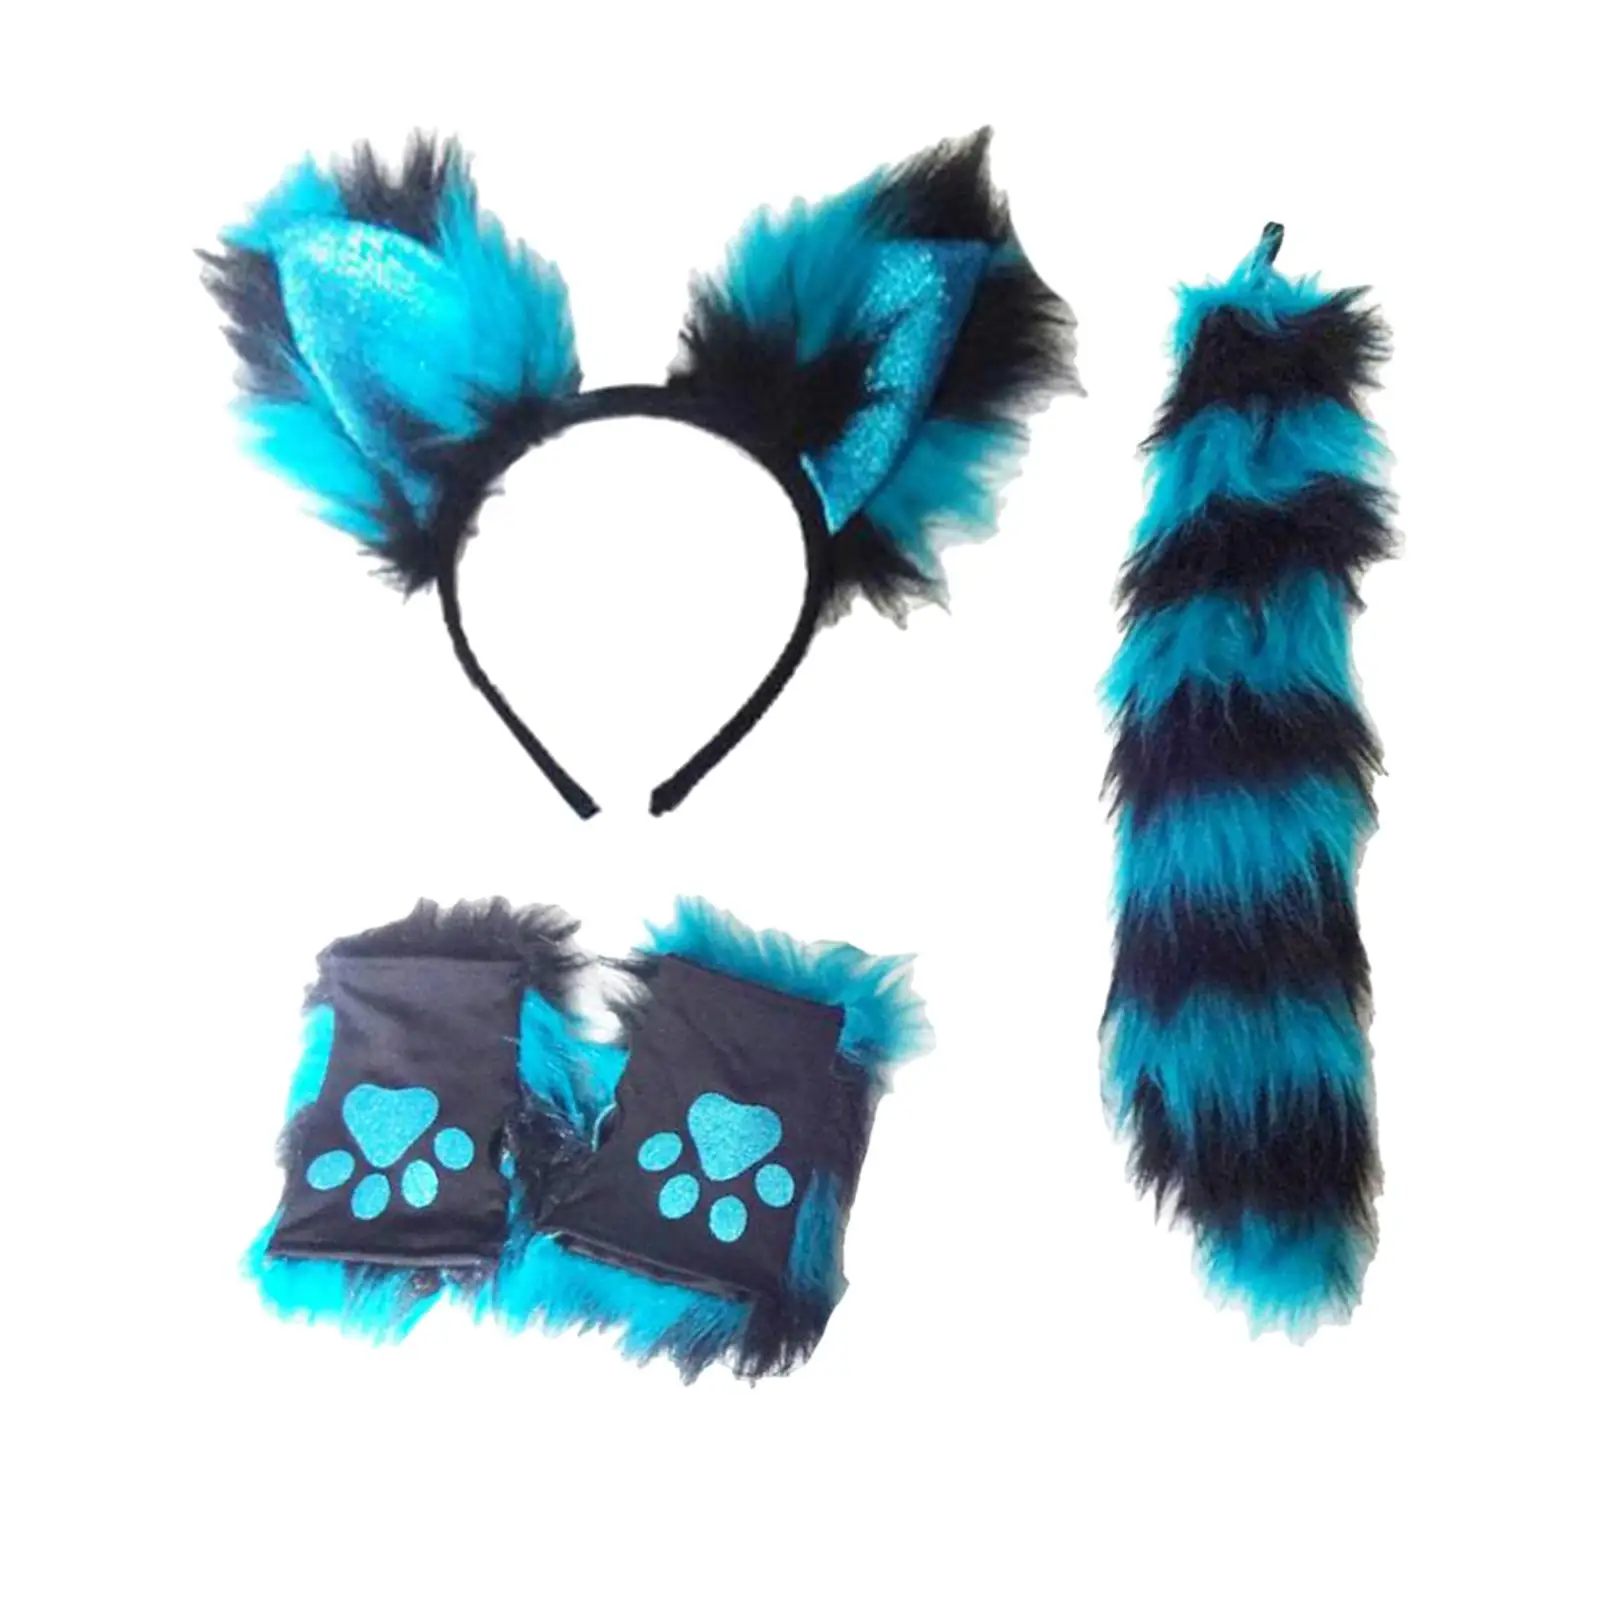 Plush Fox Ears Hair Hoop Costume Cosplay Gloves Tail Set Dress Adult for Kids Adult Halloween Masquerade Role Play Party